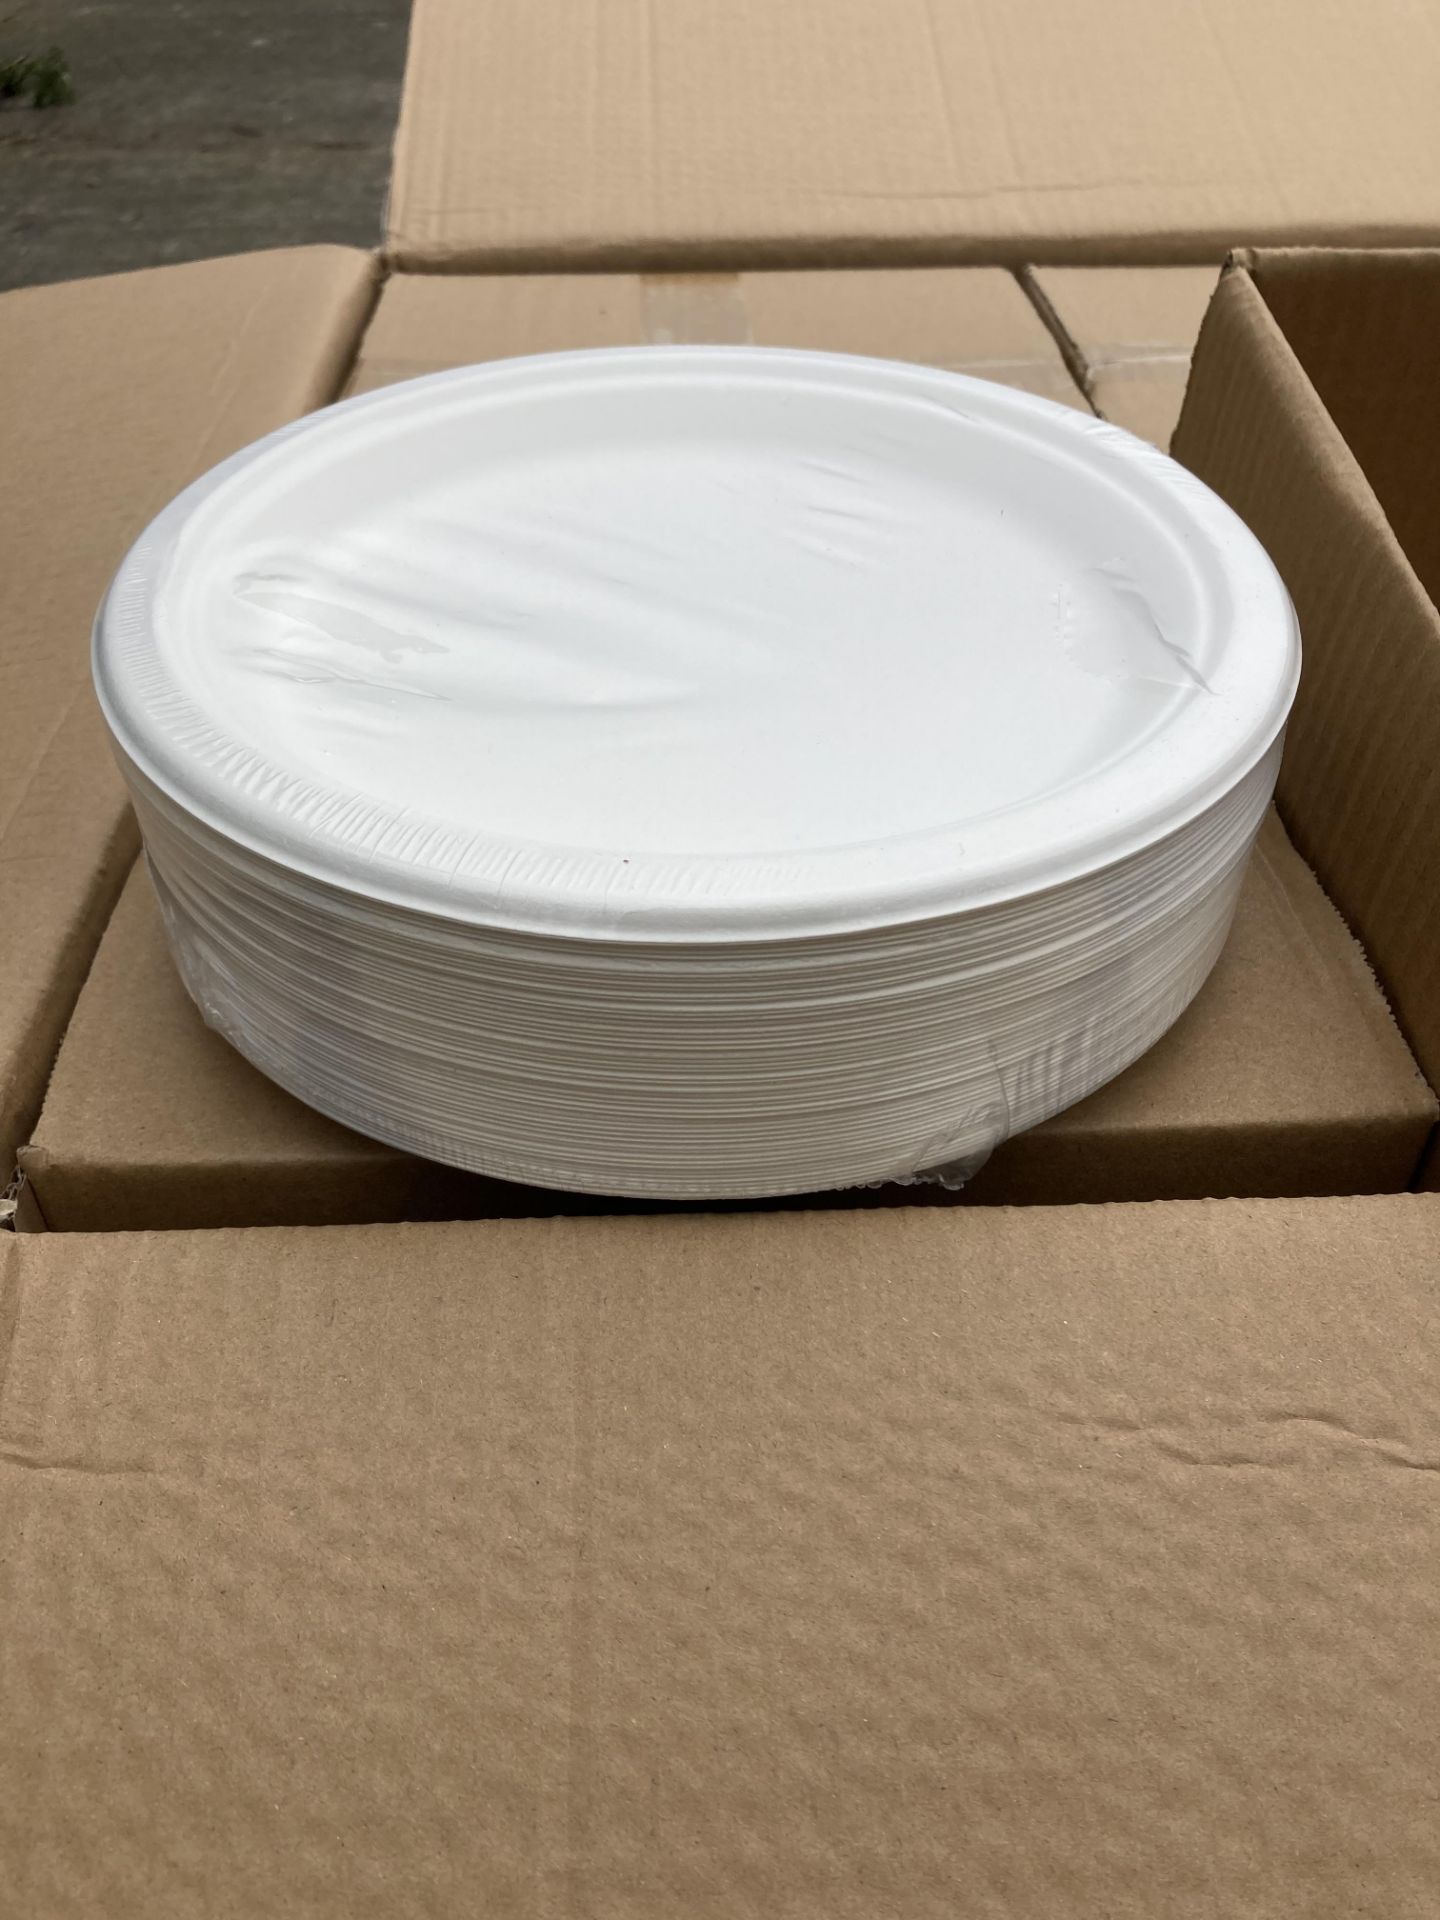 12 x Boxes of Wooden Cutlery and Paper Plates (1 x outer box) (saleroom location: Container 9) - Image 3 of 3